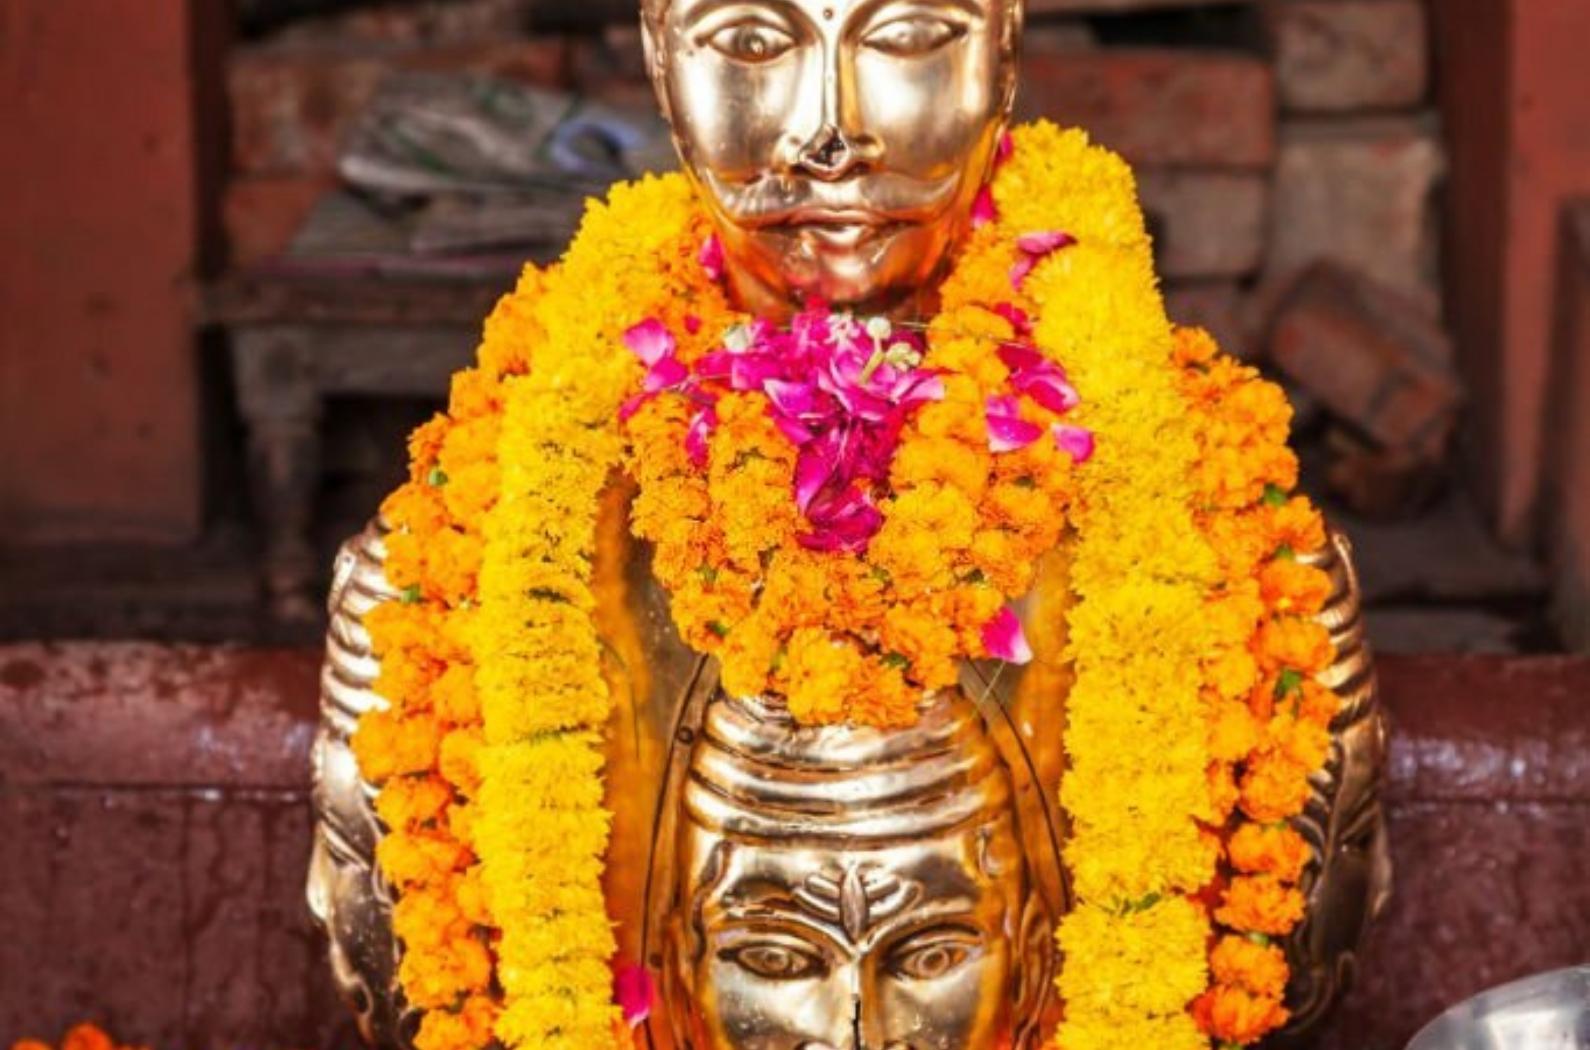 A Statue of golden color with flowers